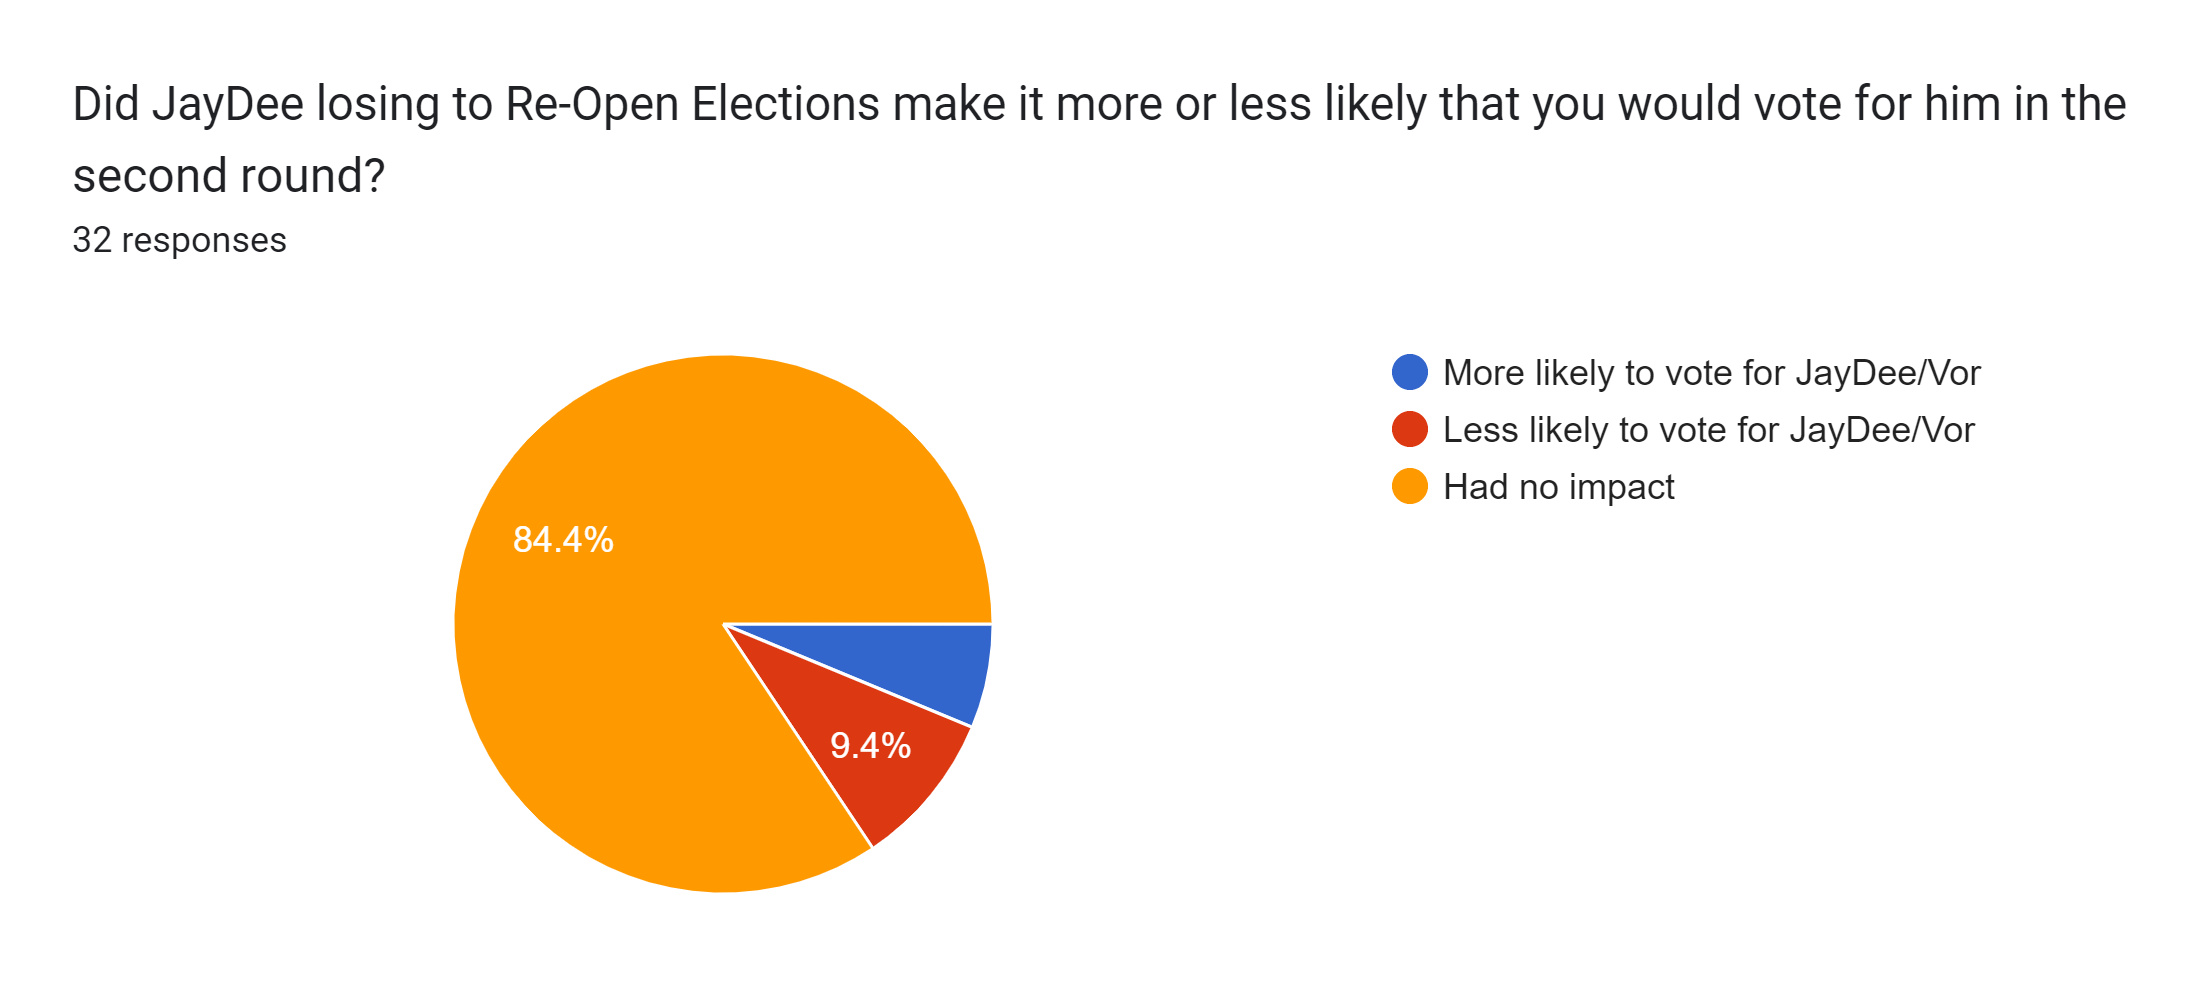 Forms response chart. Question title: Did JayDee losing to Re-Open Elections make it more or less likely that you would vote for him in the second round?. Number of responses: 32 responses.